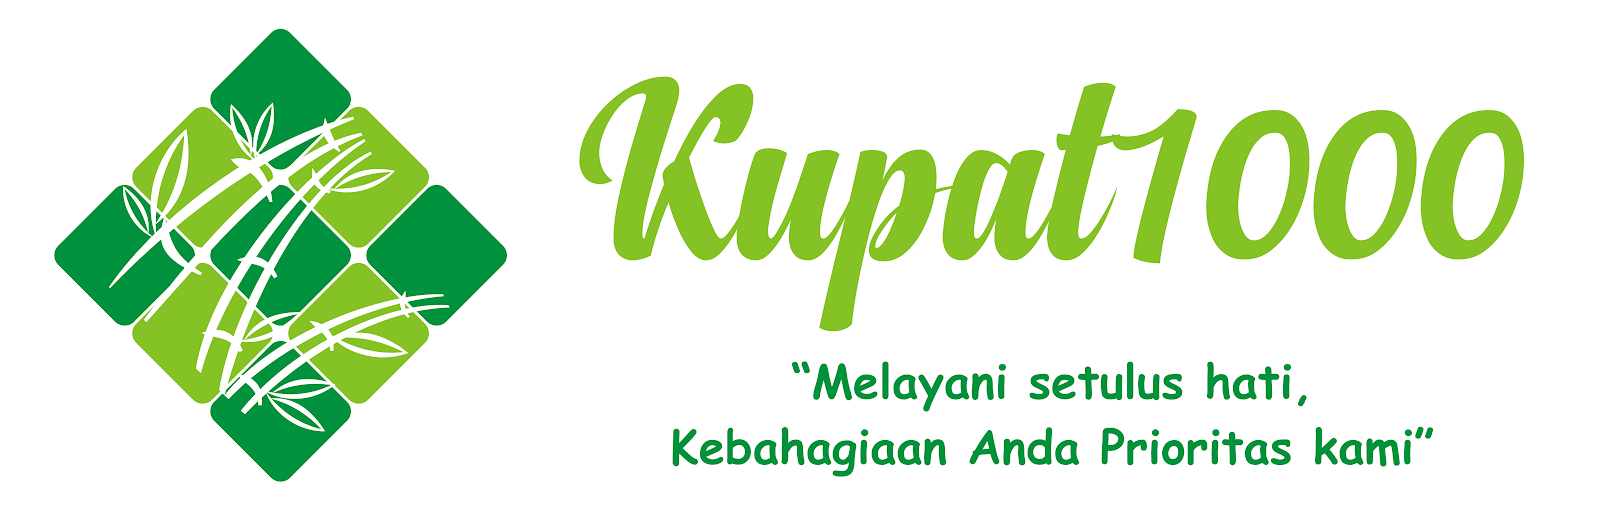 Kupat1000 | Experiential Learning